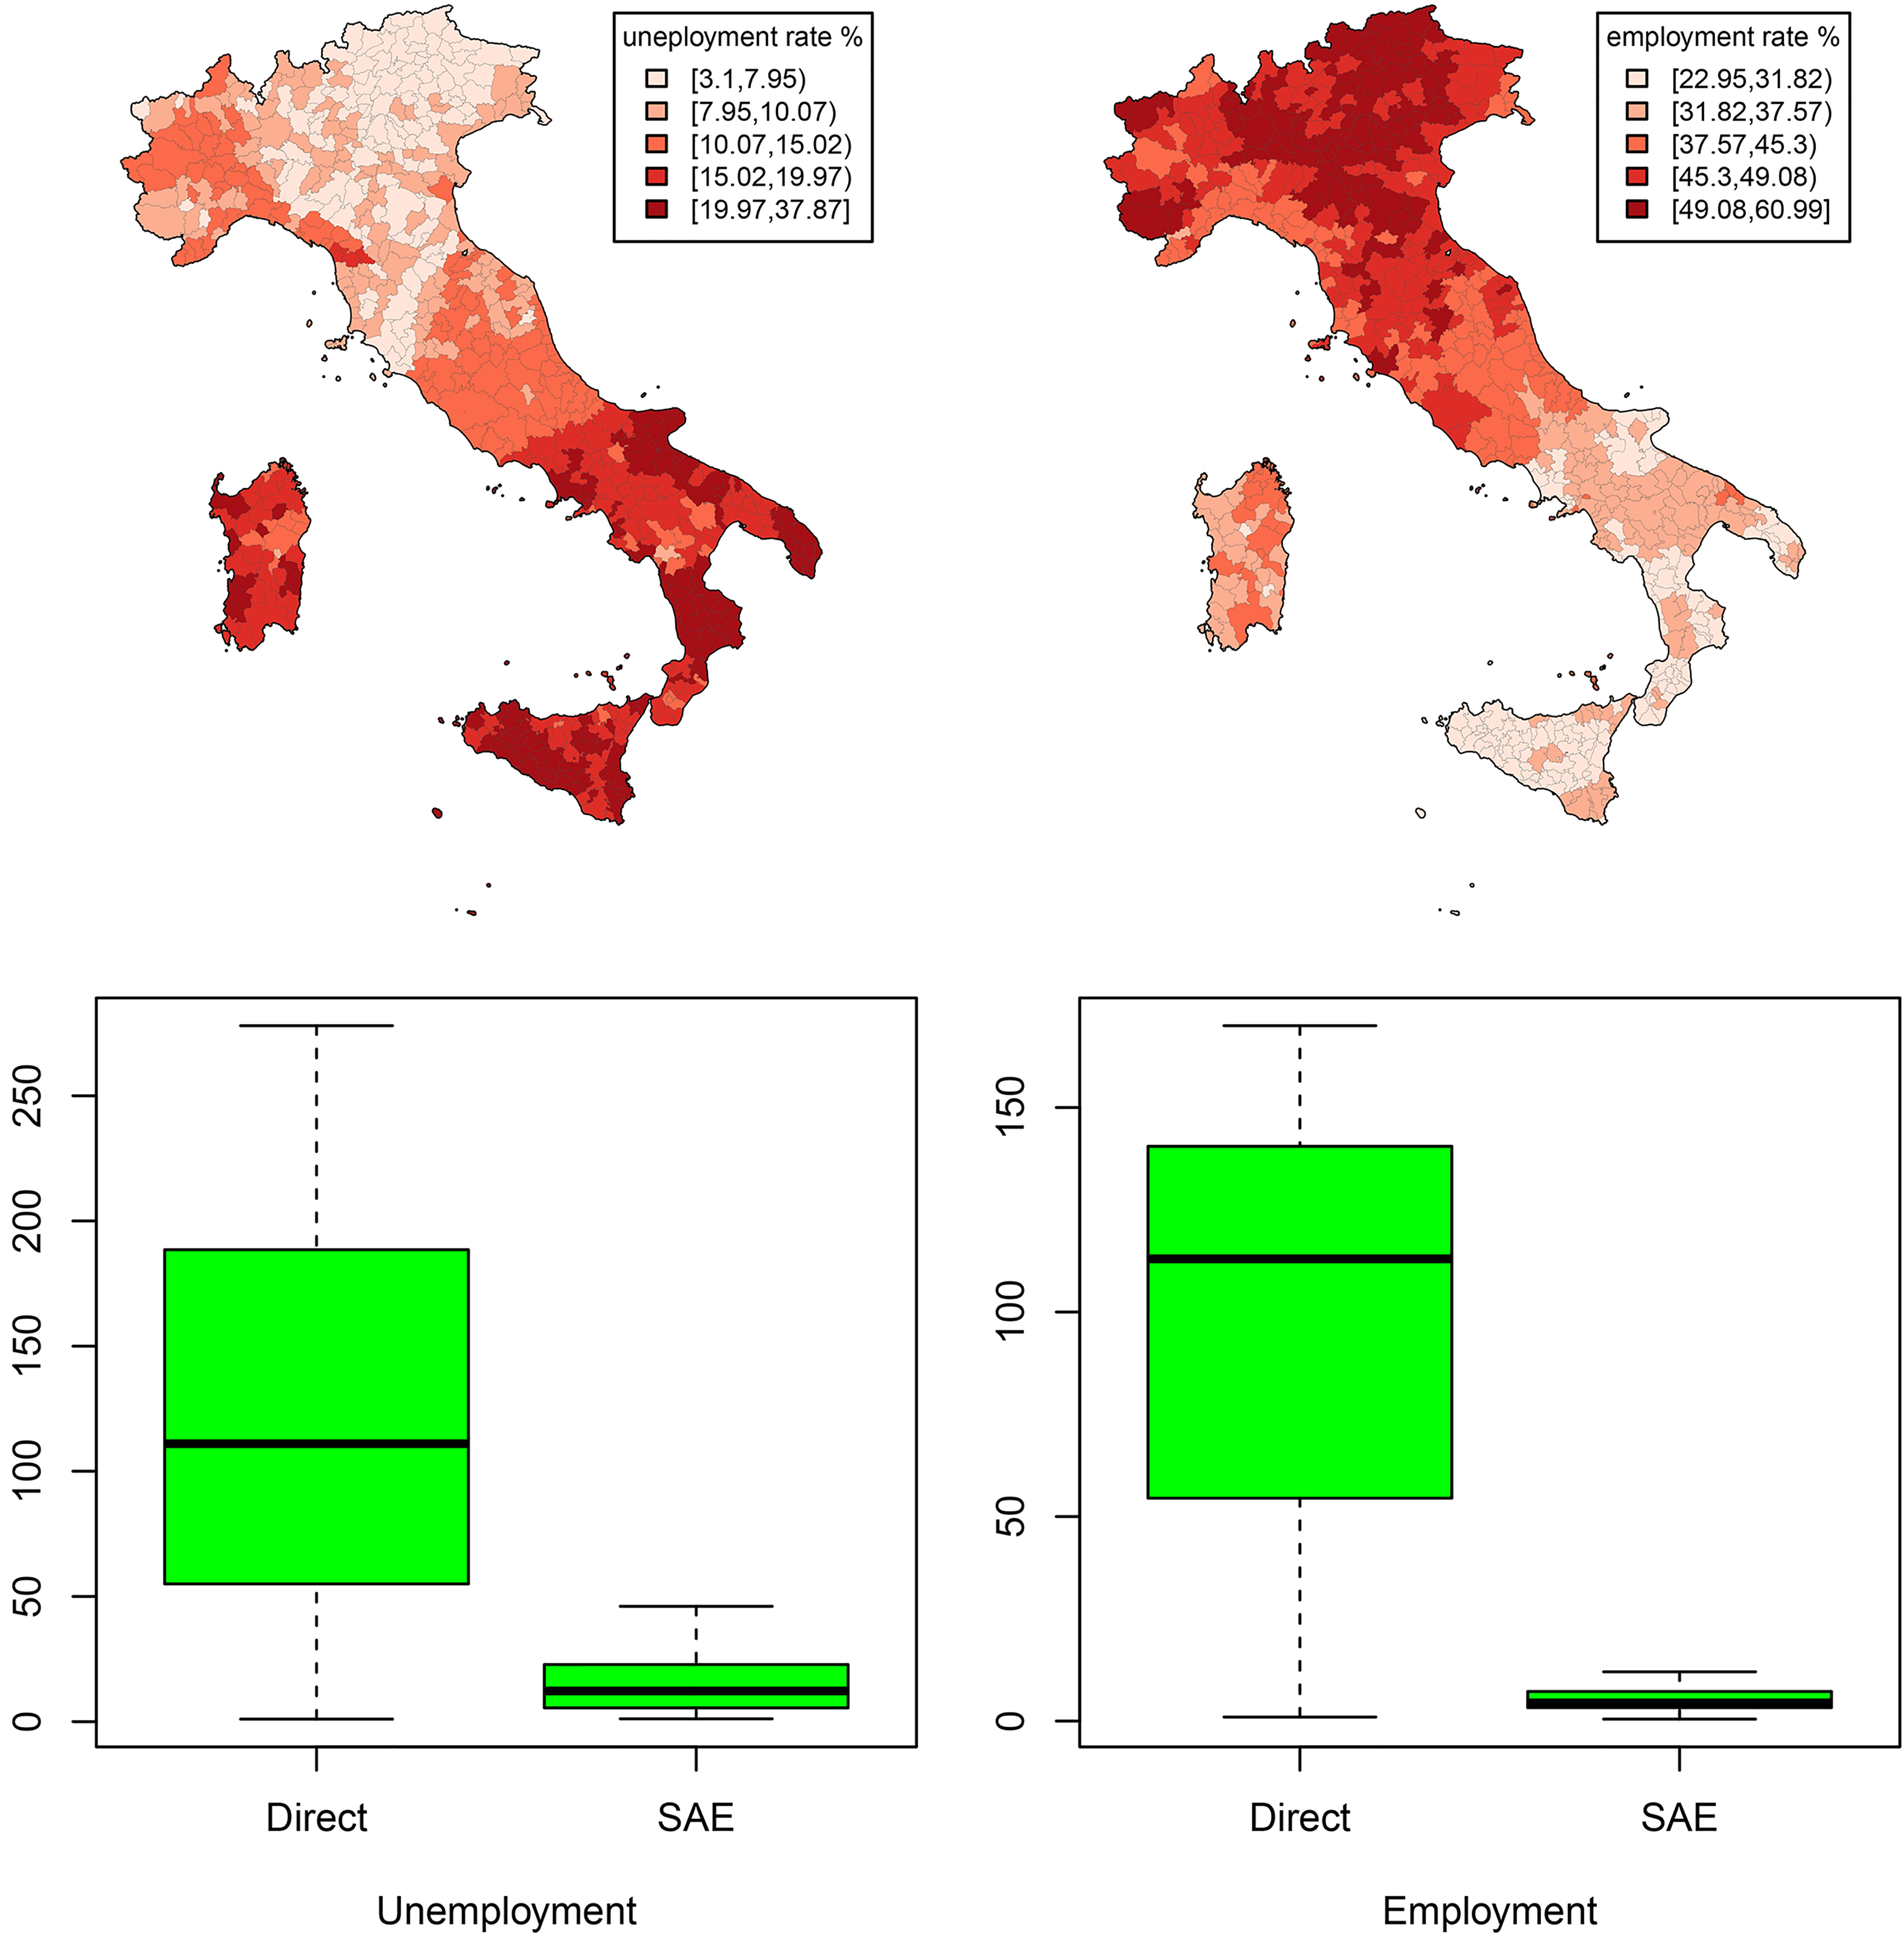 ST-EBLUP estimates of unemployment and employment rate at LMA level in Italy and efficiency gain of the estimator over the direct one (year 2014).